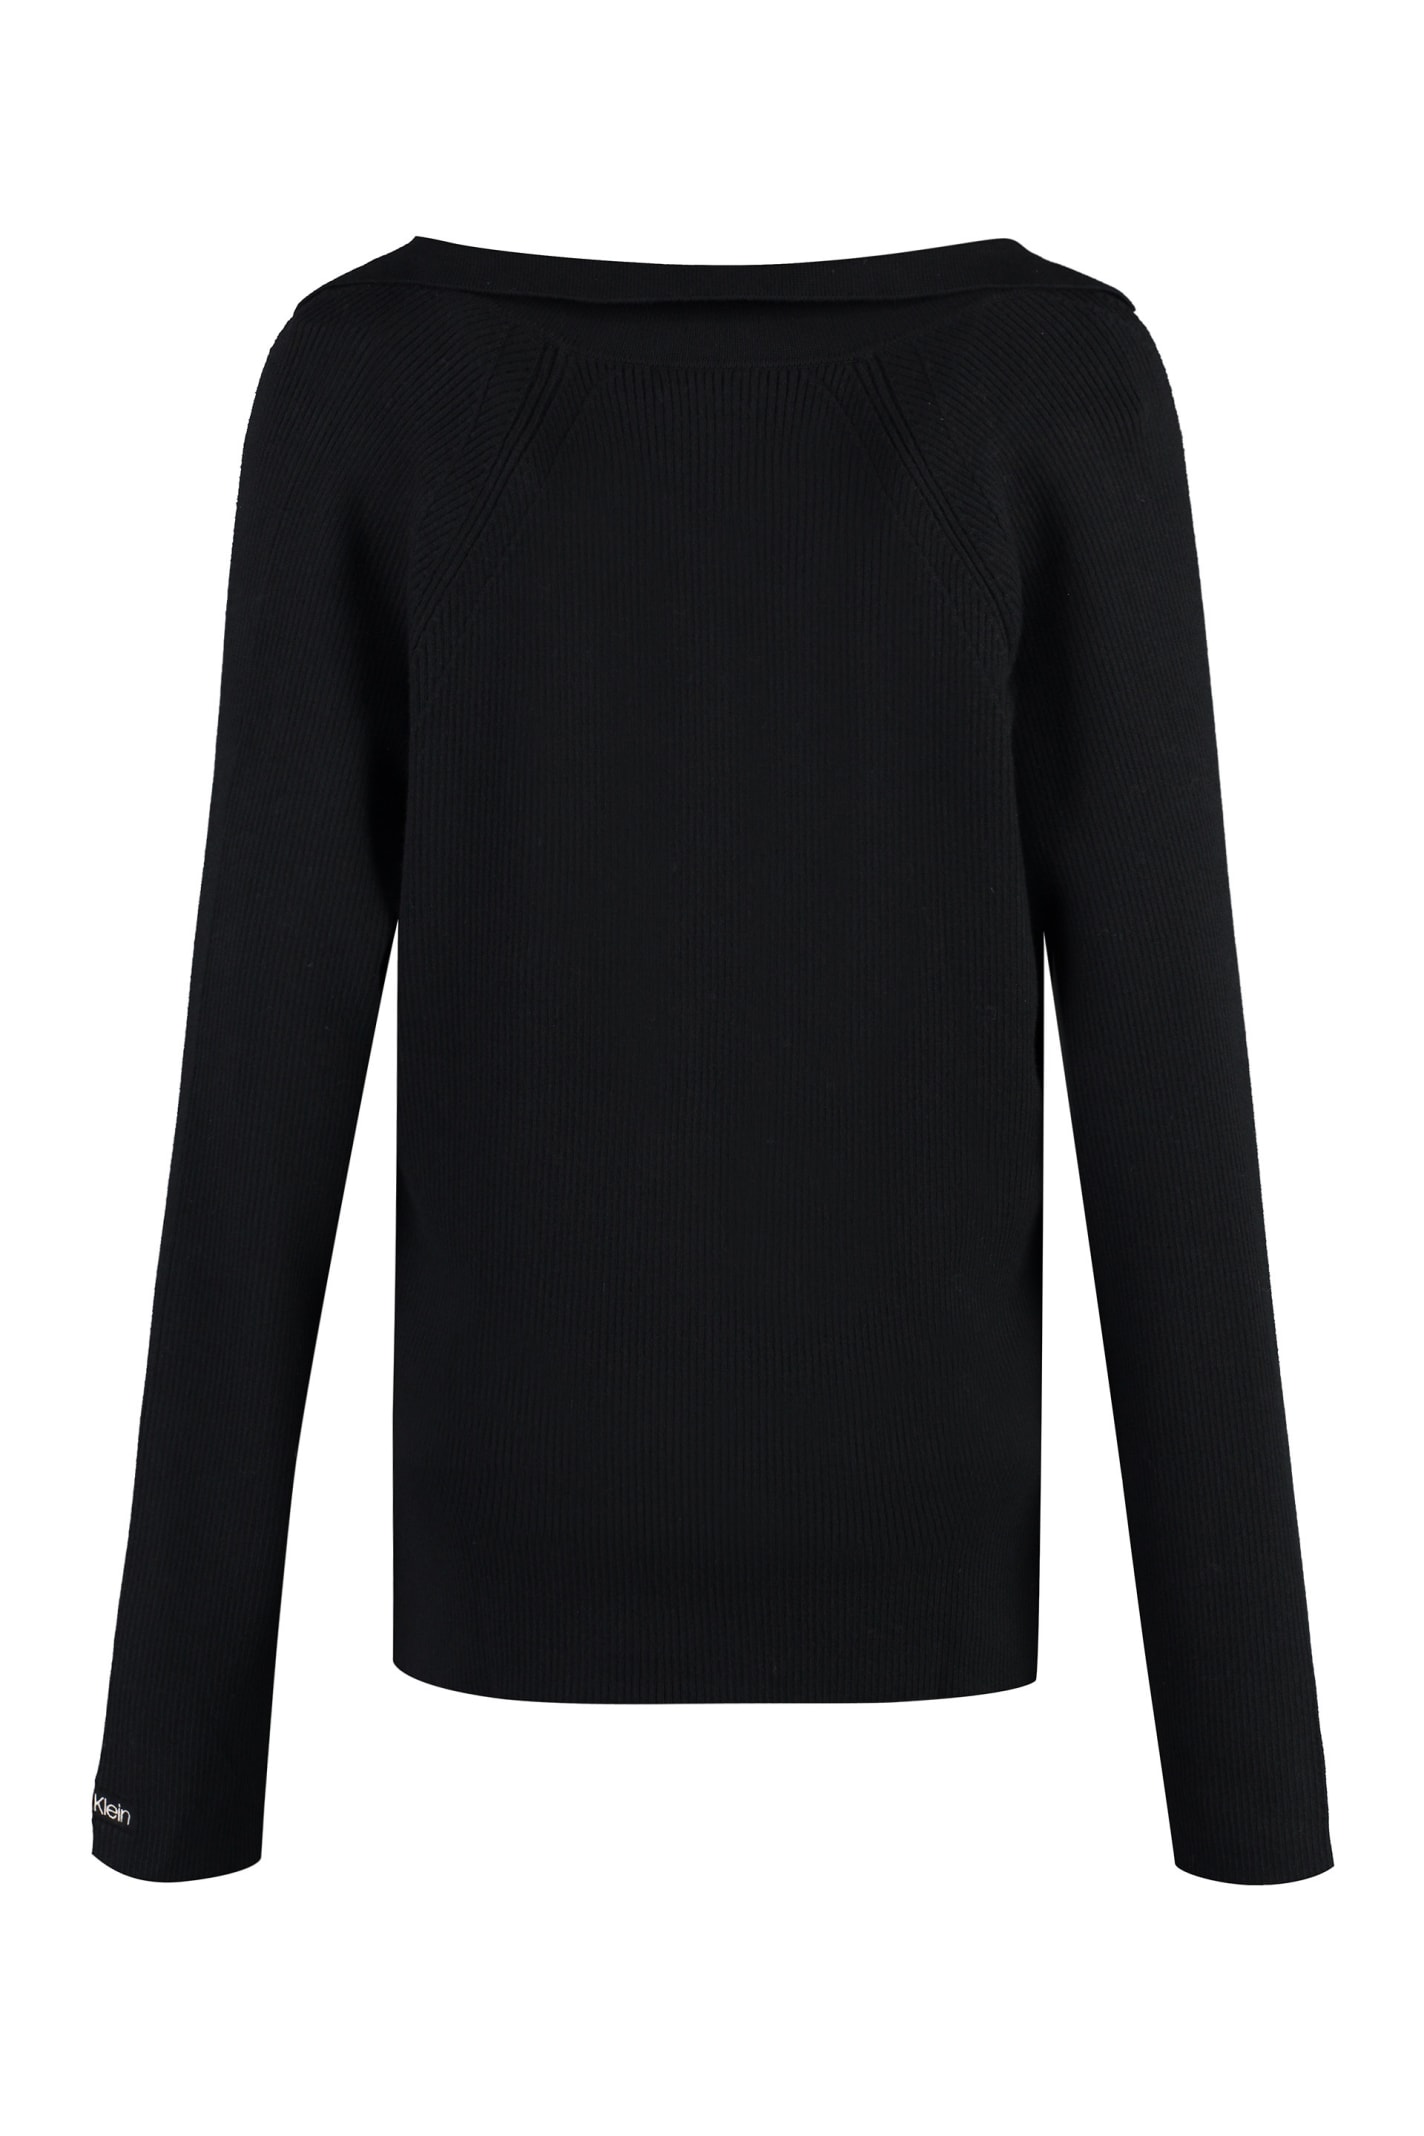 Shop Calvin Klein Ribbed Knit Top Sweater In Black